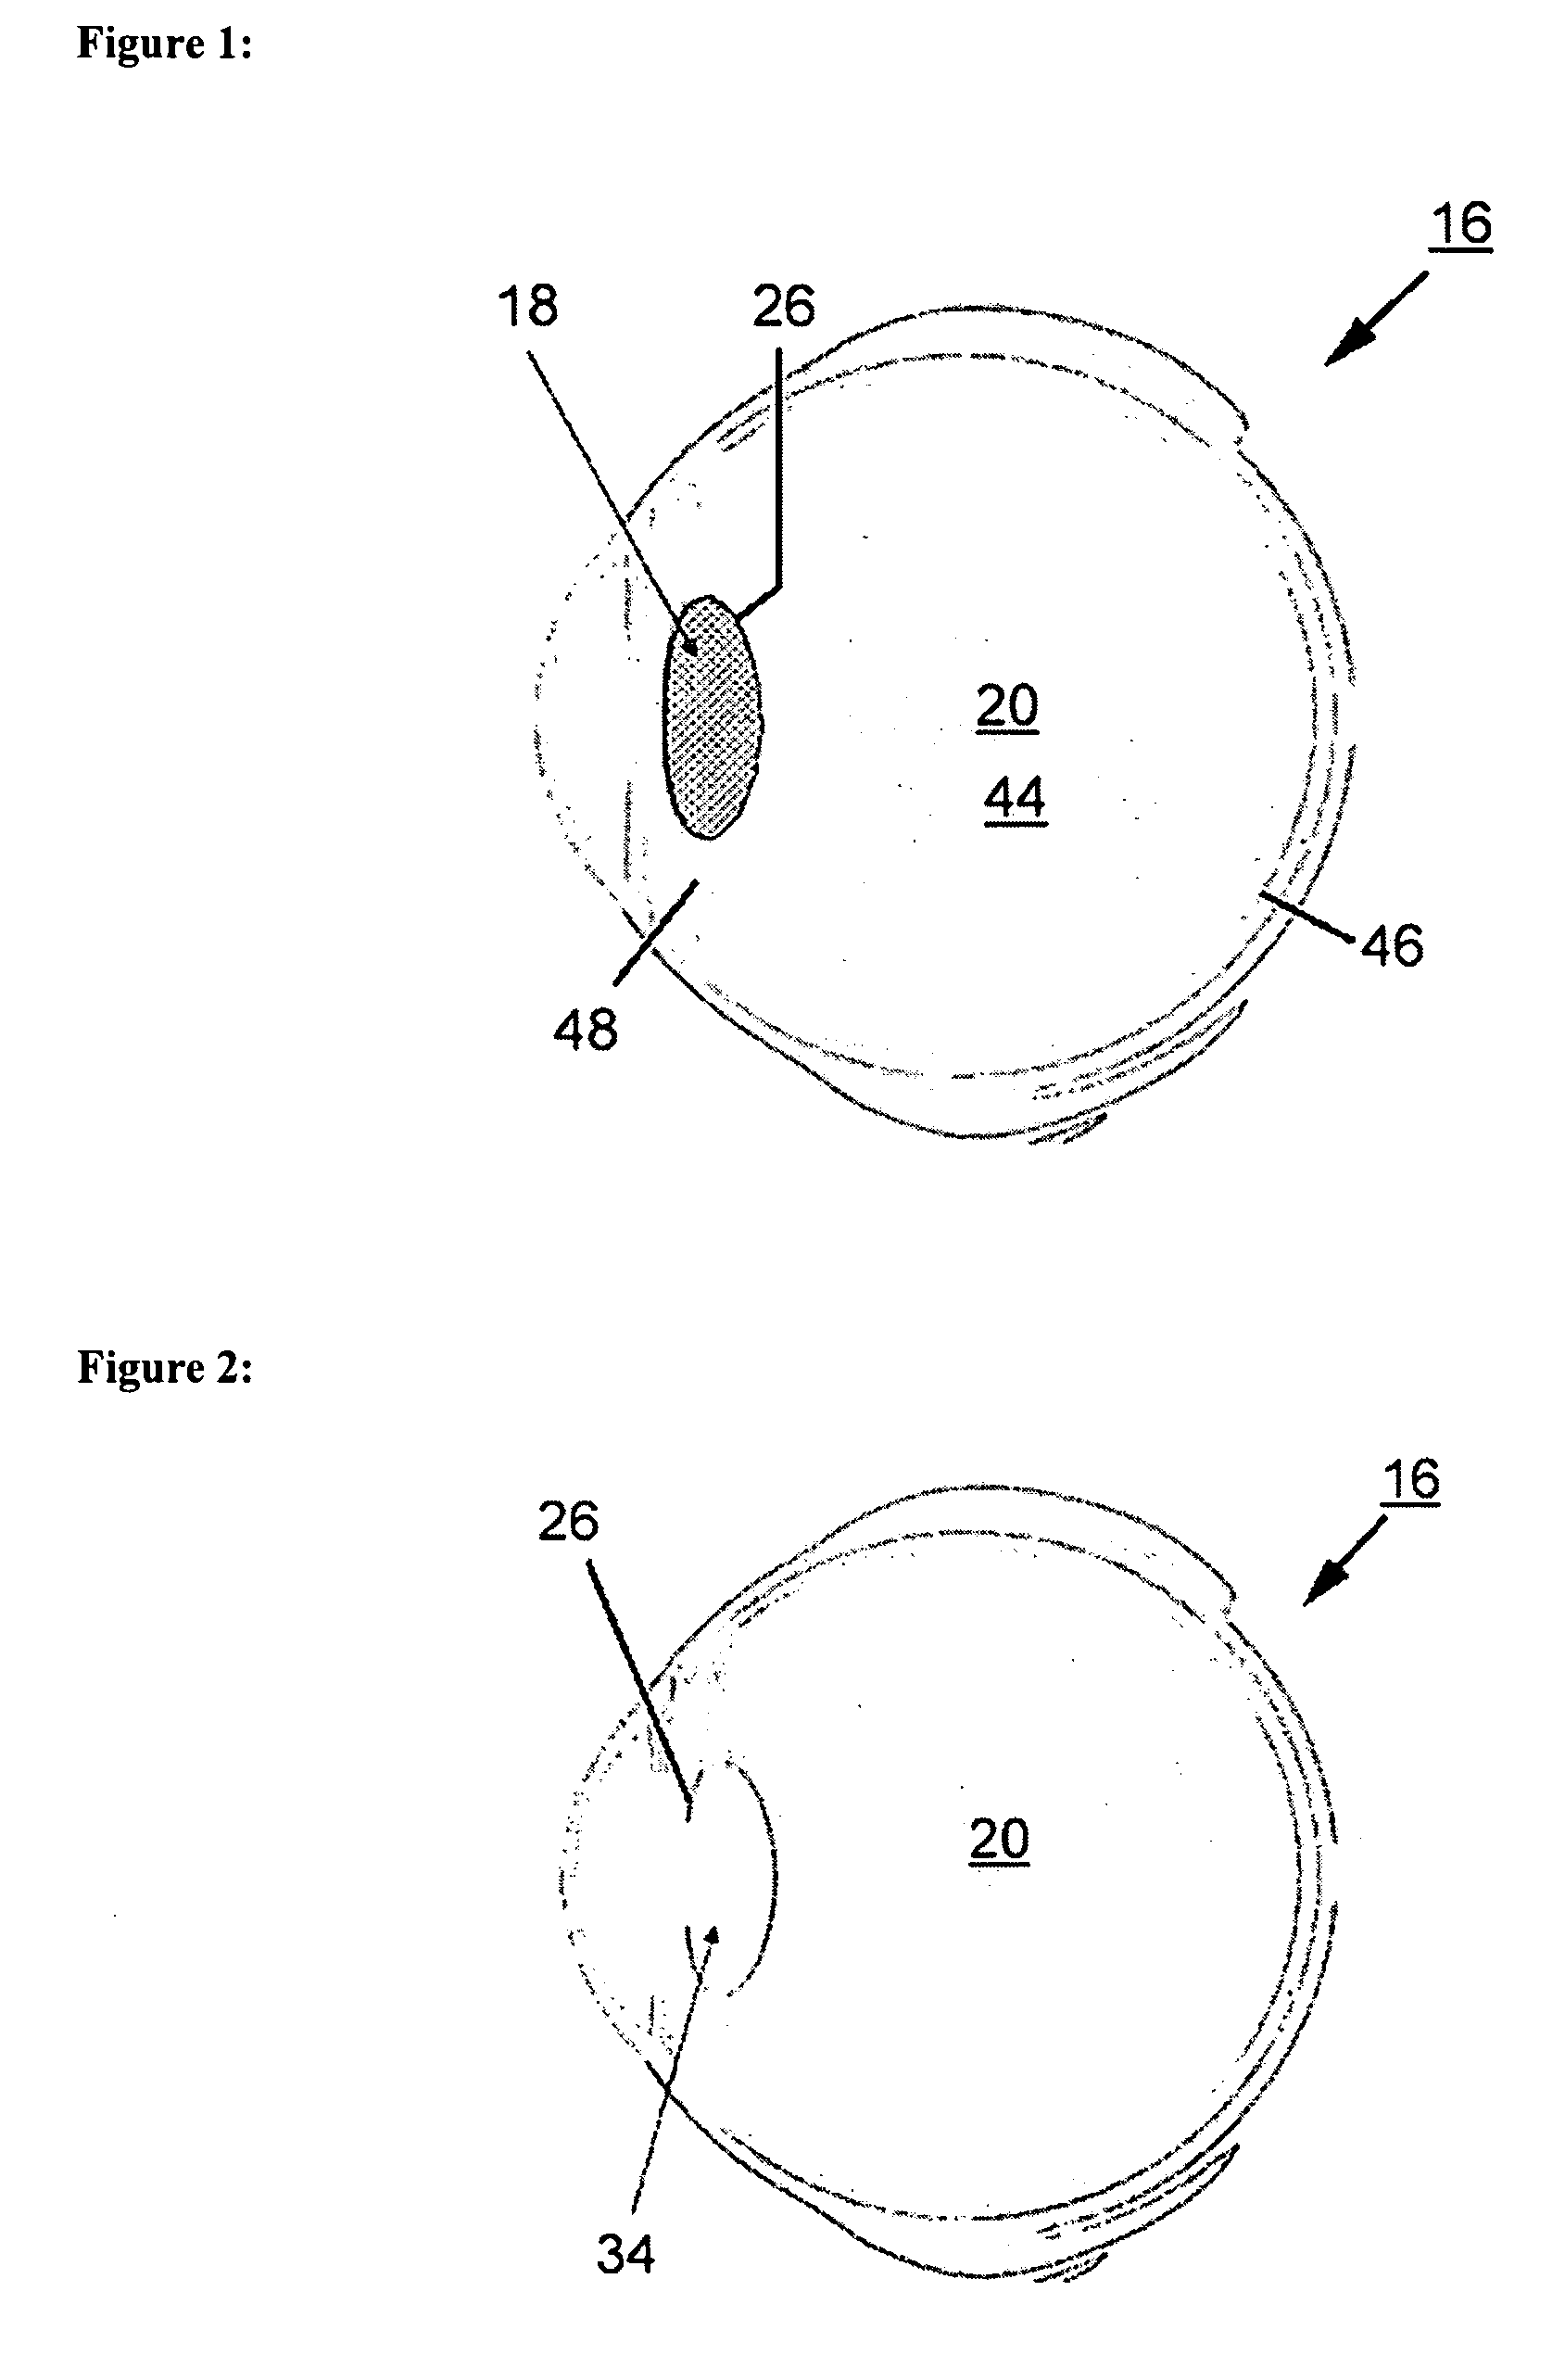 Eye implant and methods of positioning an artifical eye implant with the eye of a human or an animal